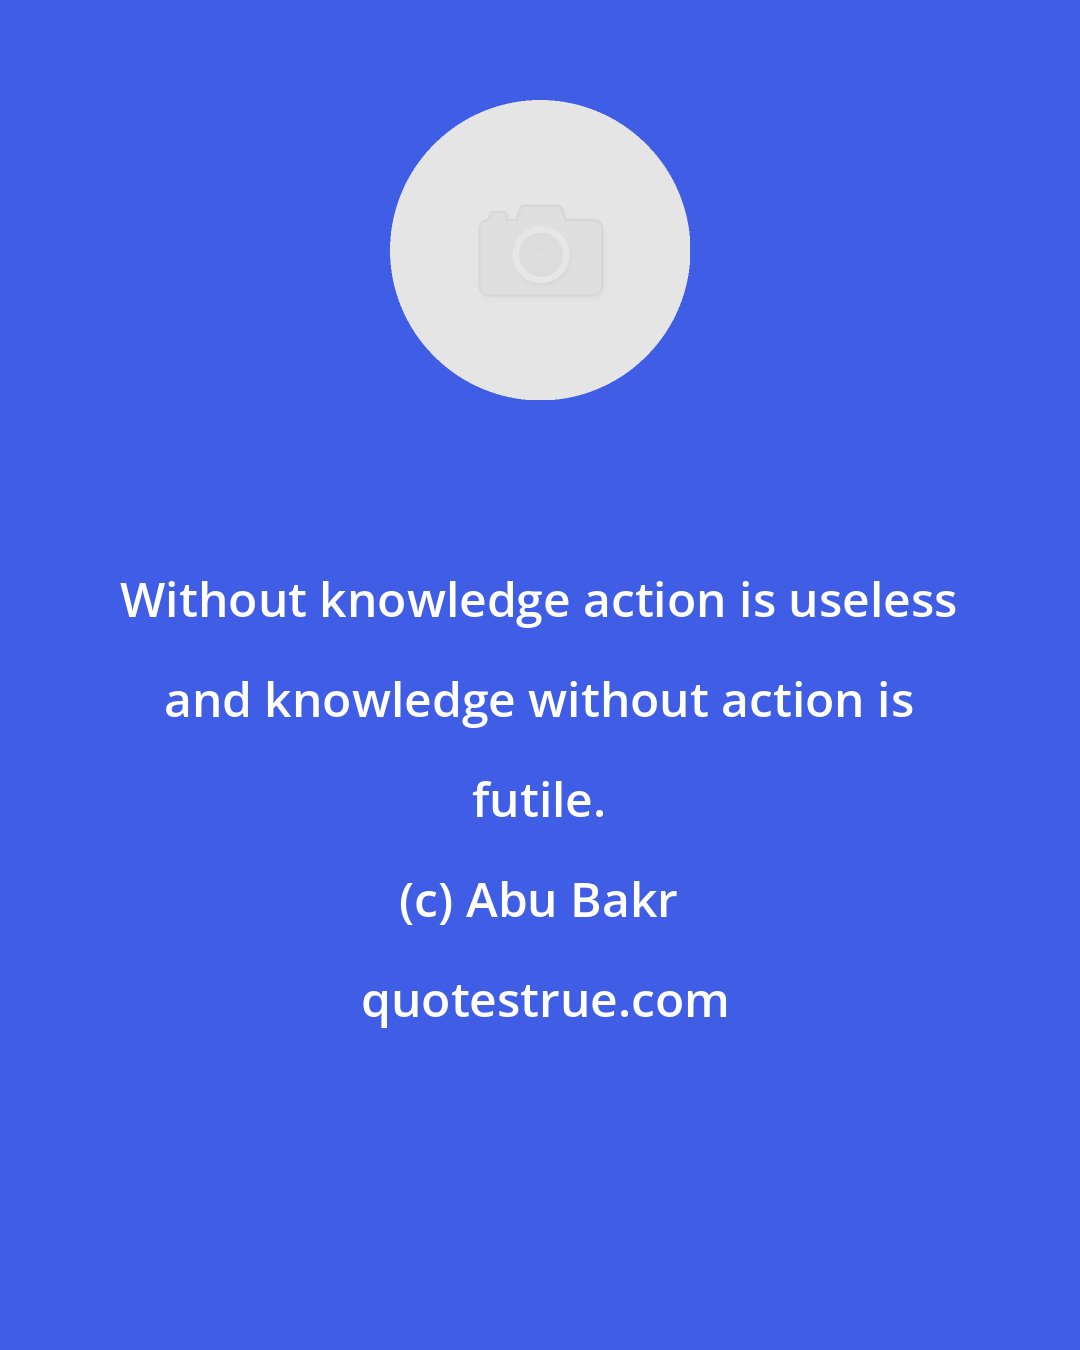 Abu Bakr: Without knowledge action is useless and knowledge without action is futile.